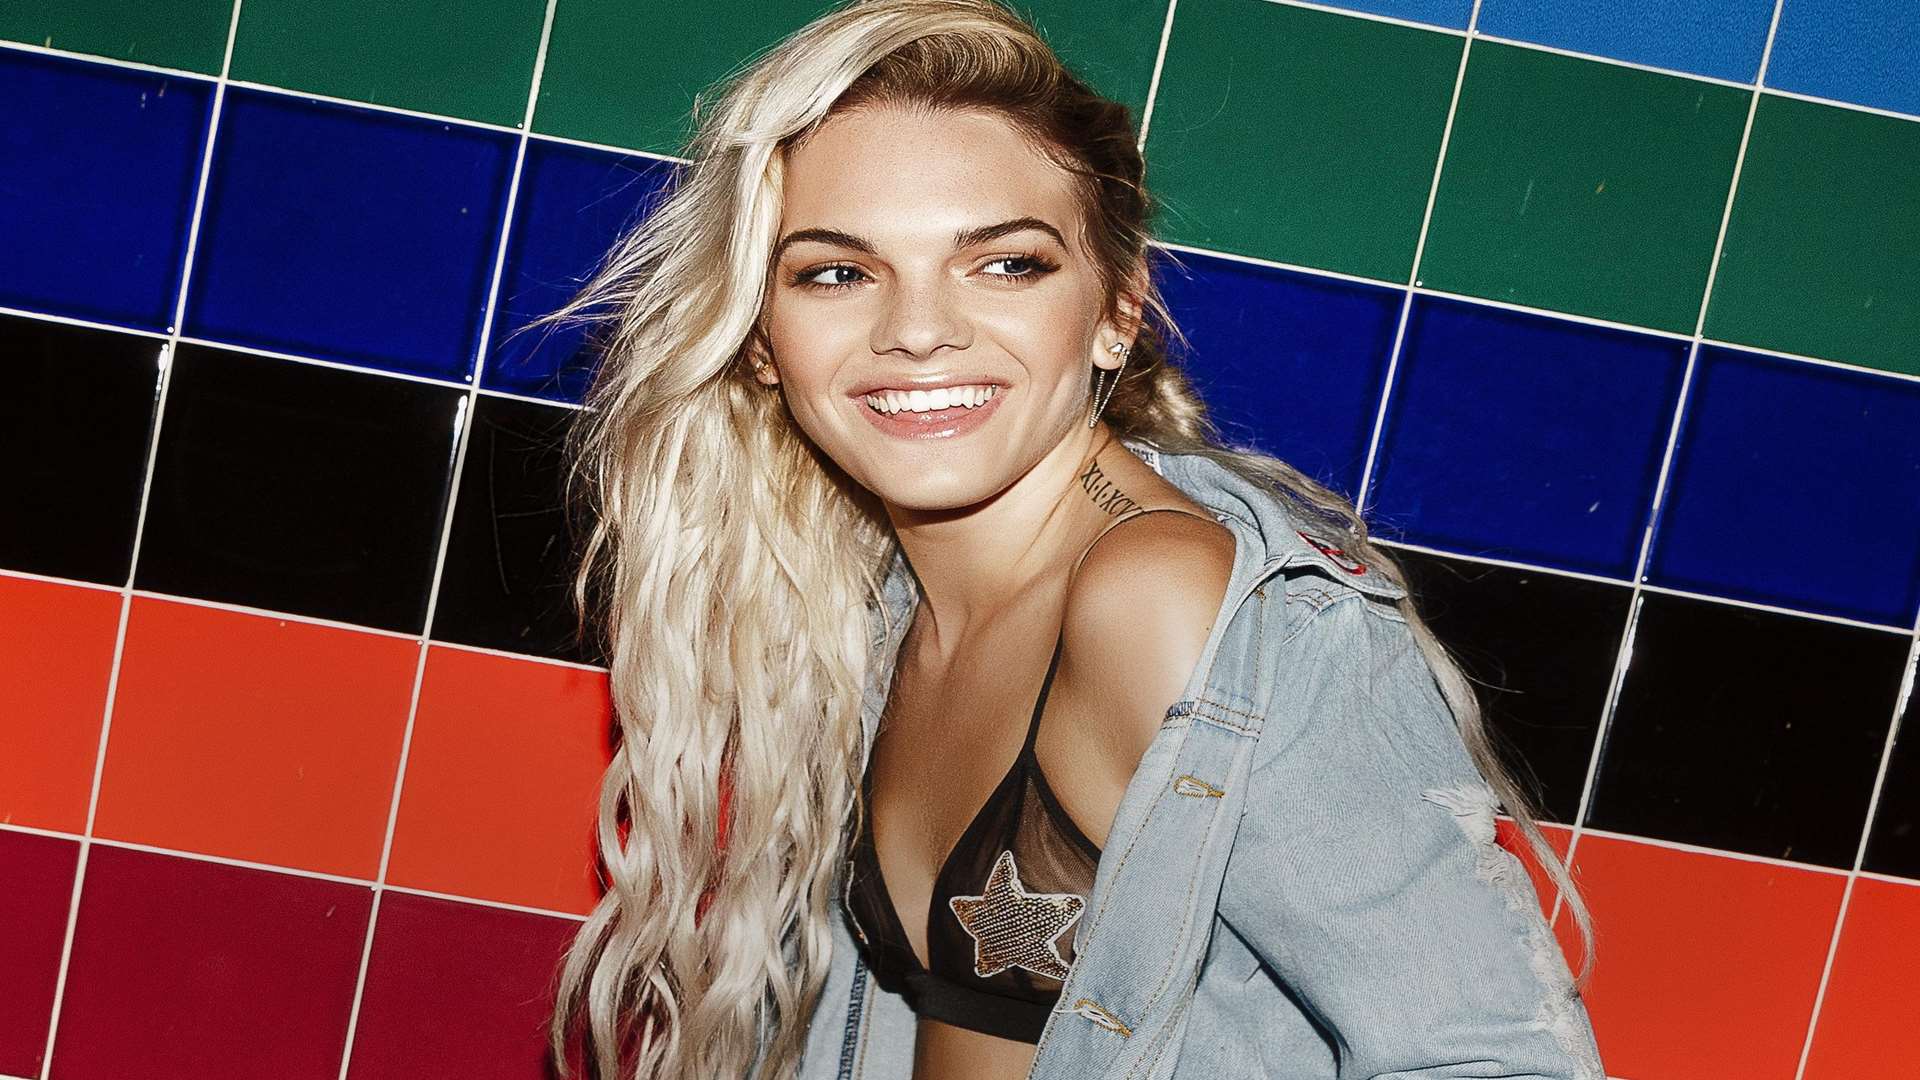 Louisa Johnson is coming to Big Day Out and to the Spitfire Ground Canterbury, supporting Olly Murs